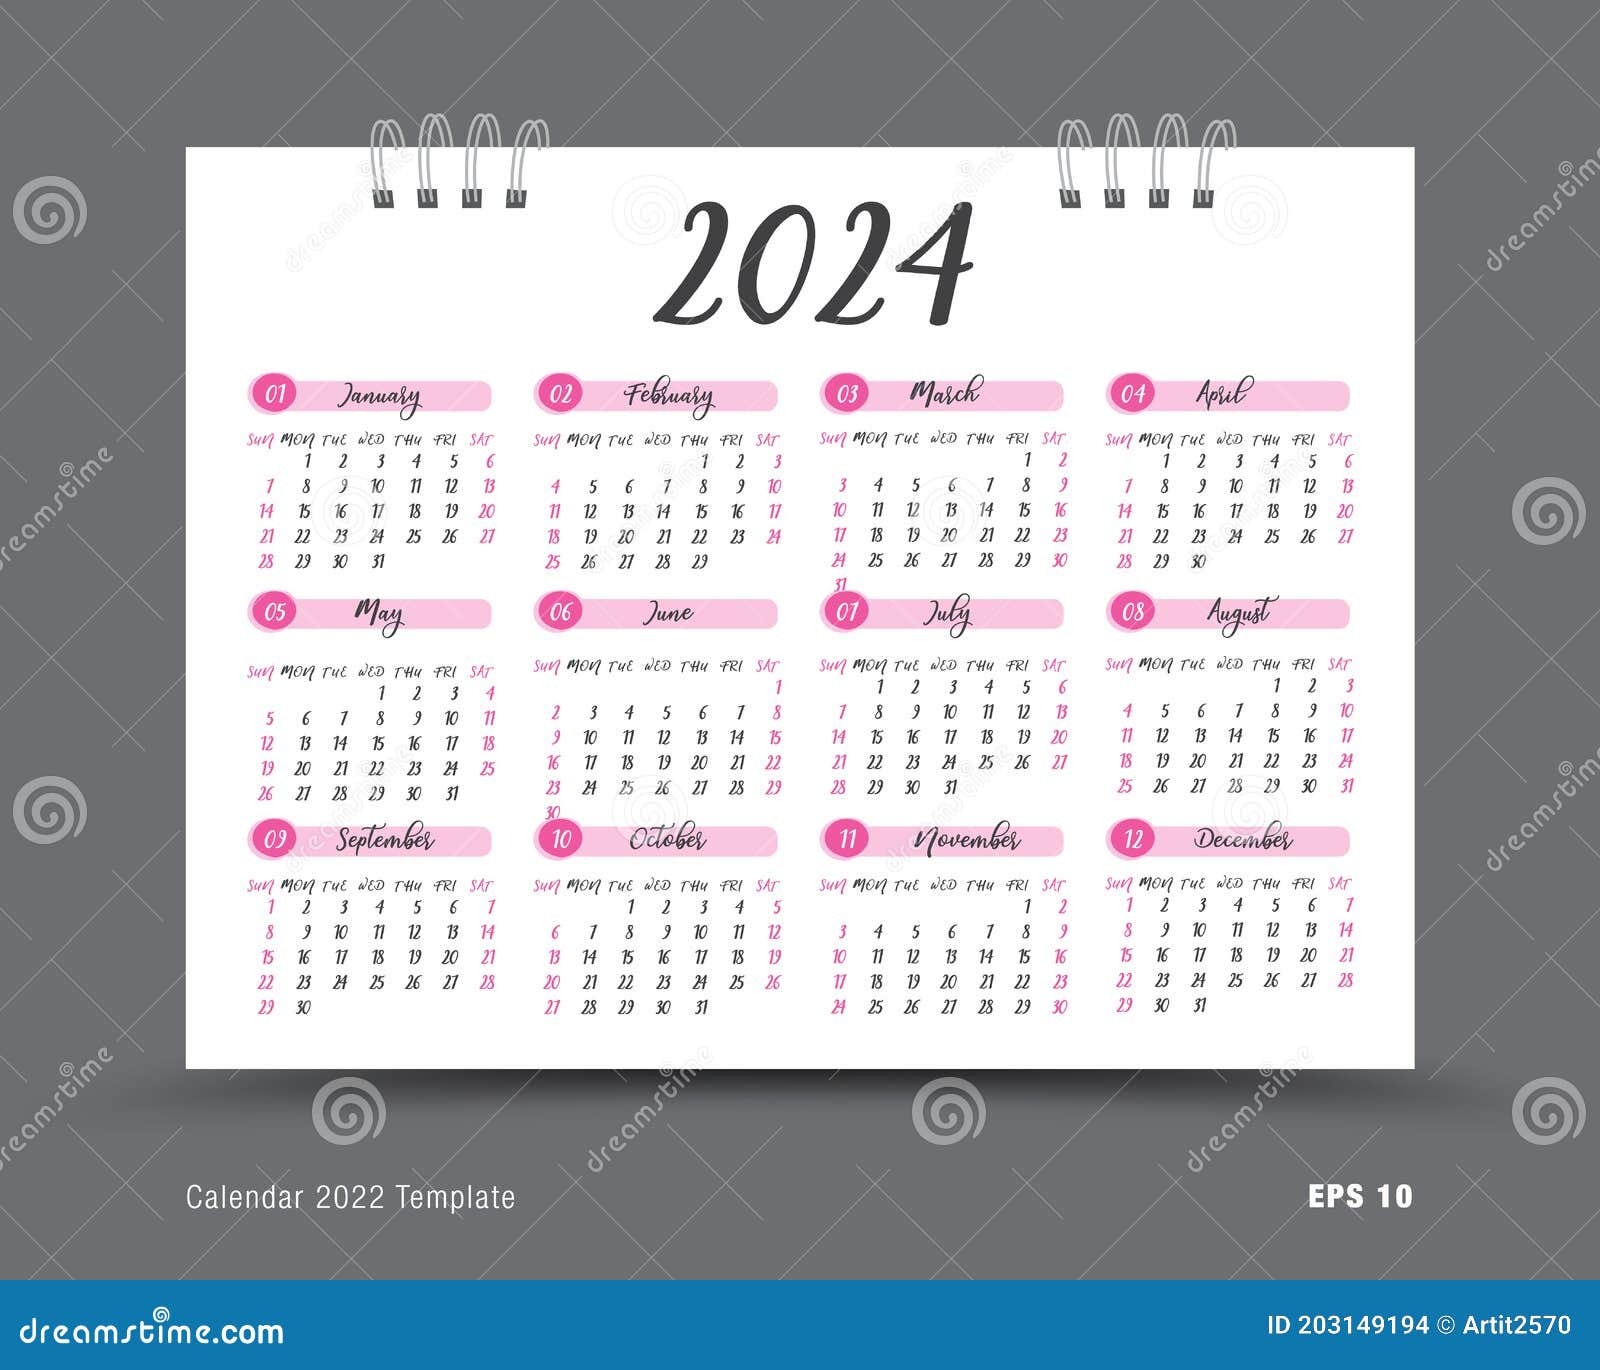 Calendar 2024 Template Layout, 12 Months Yearly Calendar Set in 2024